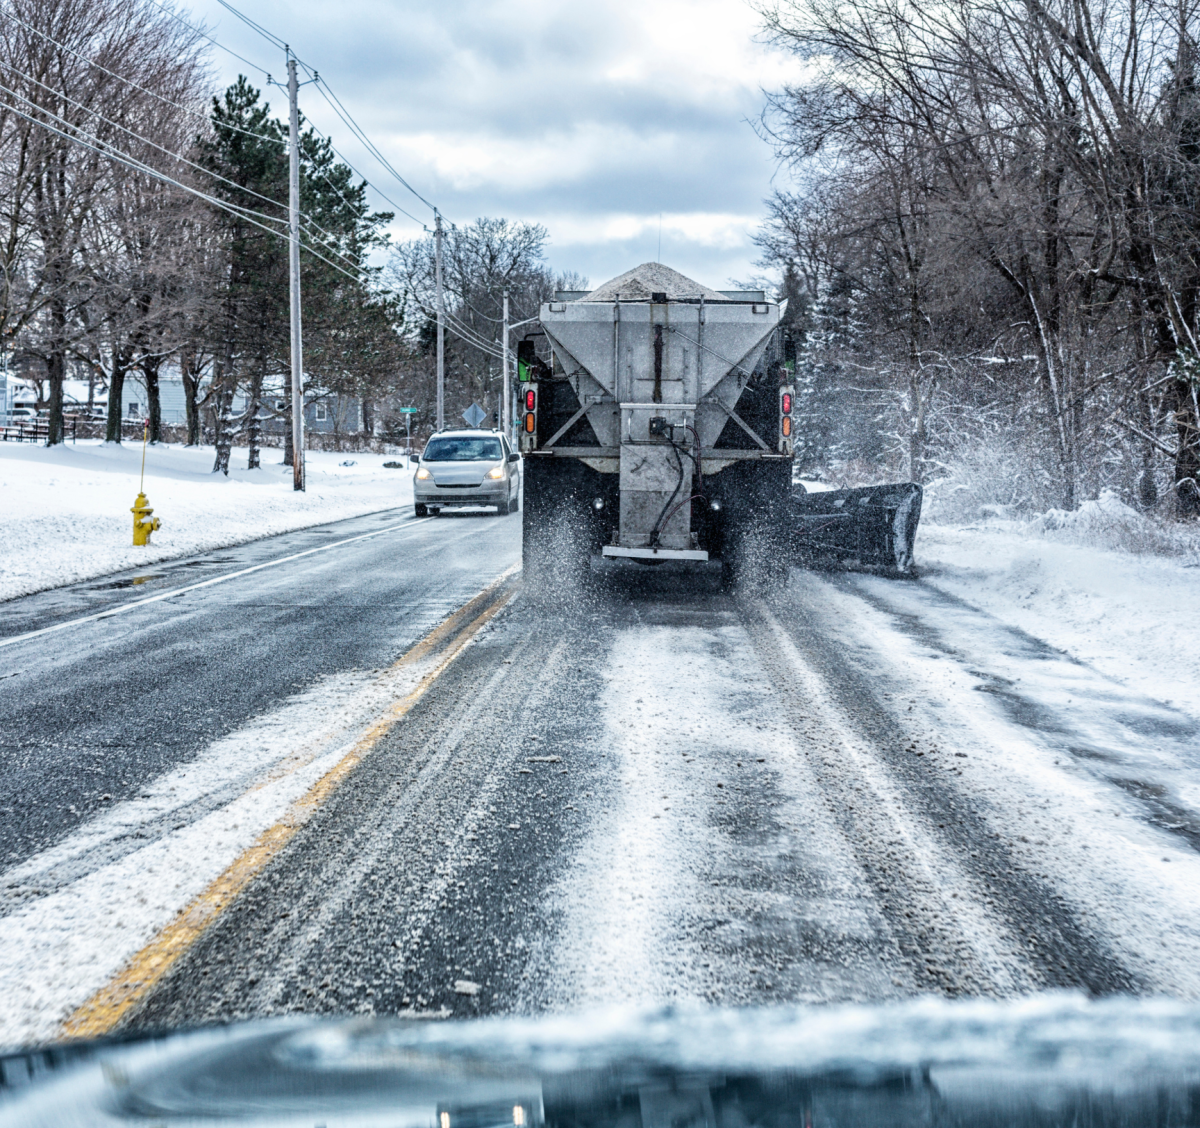 Read+up+on+helpful+tips+to+deal+with+road+salt.